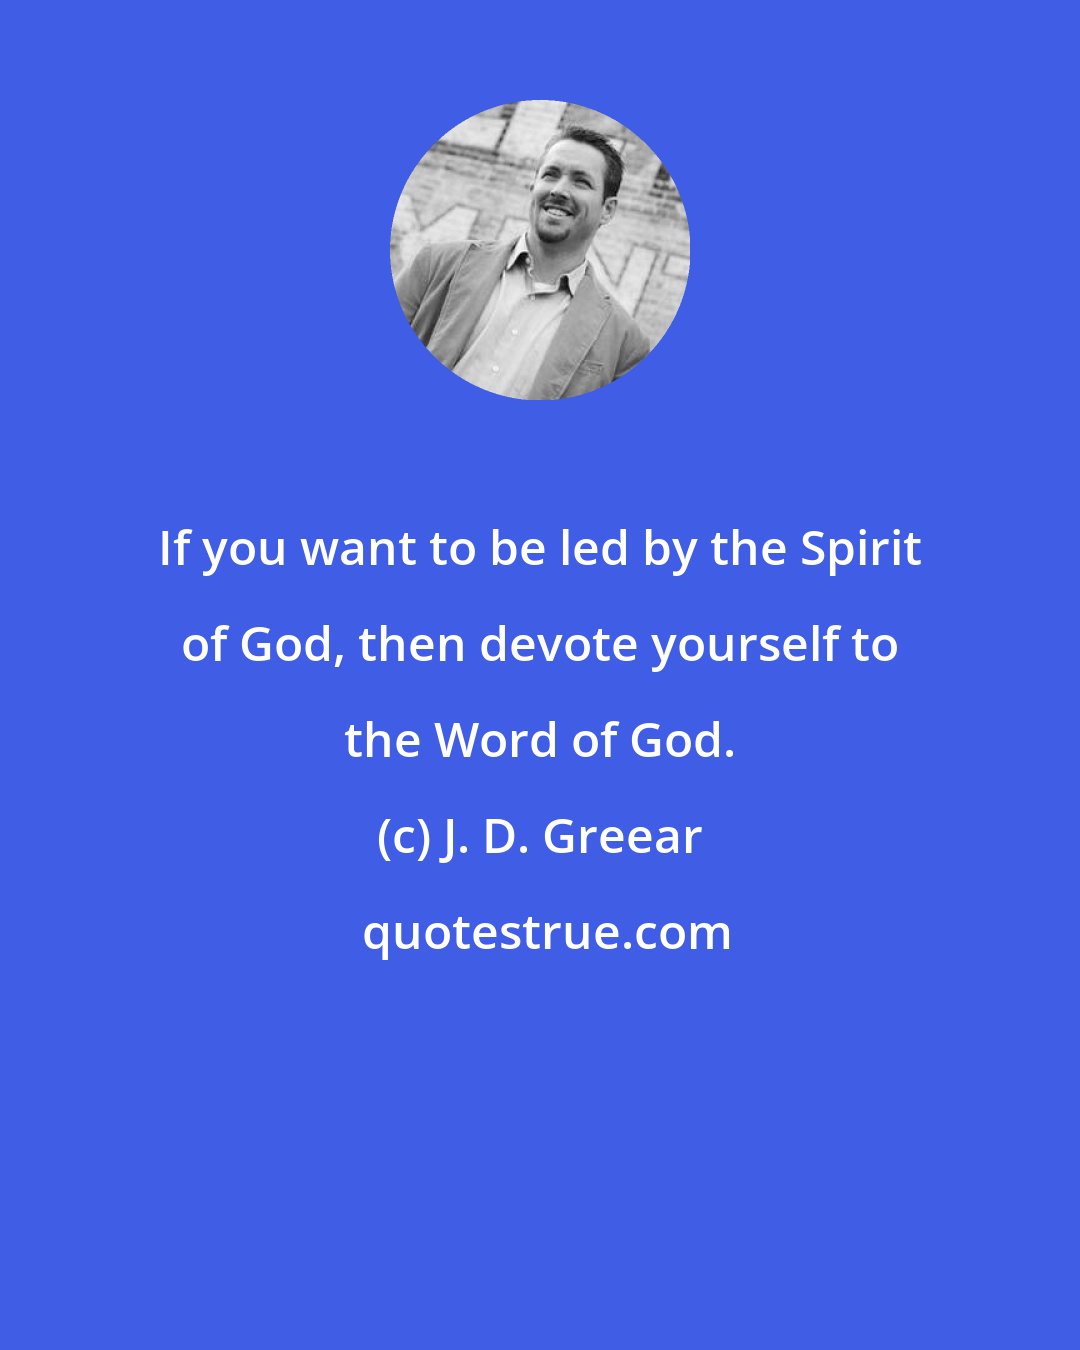 J. D. Greear: If you want to be led by the Spirit of God, then devote yourself to the Word of God.